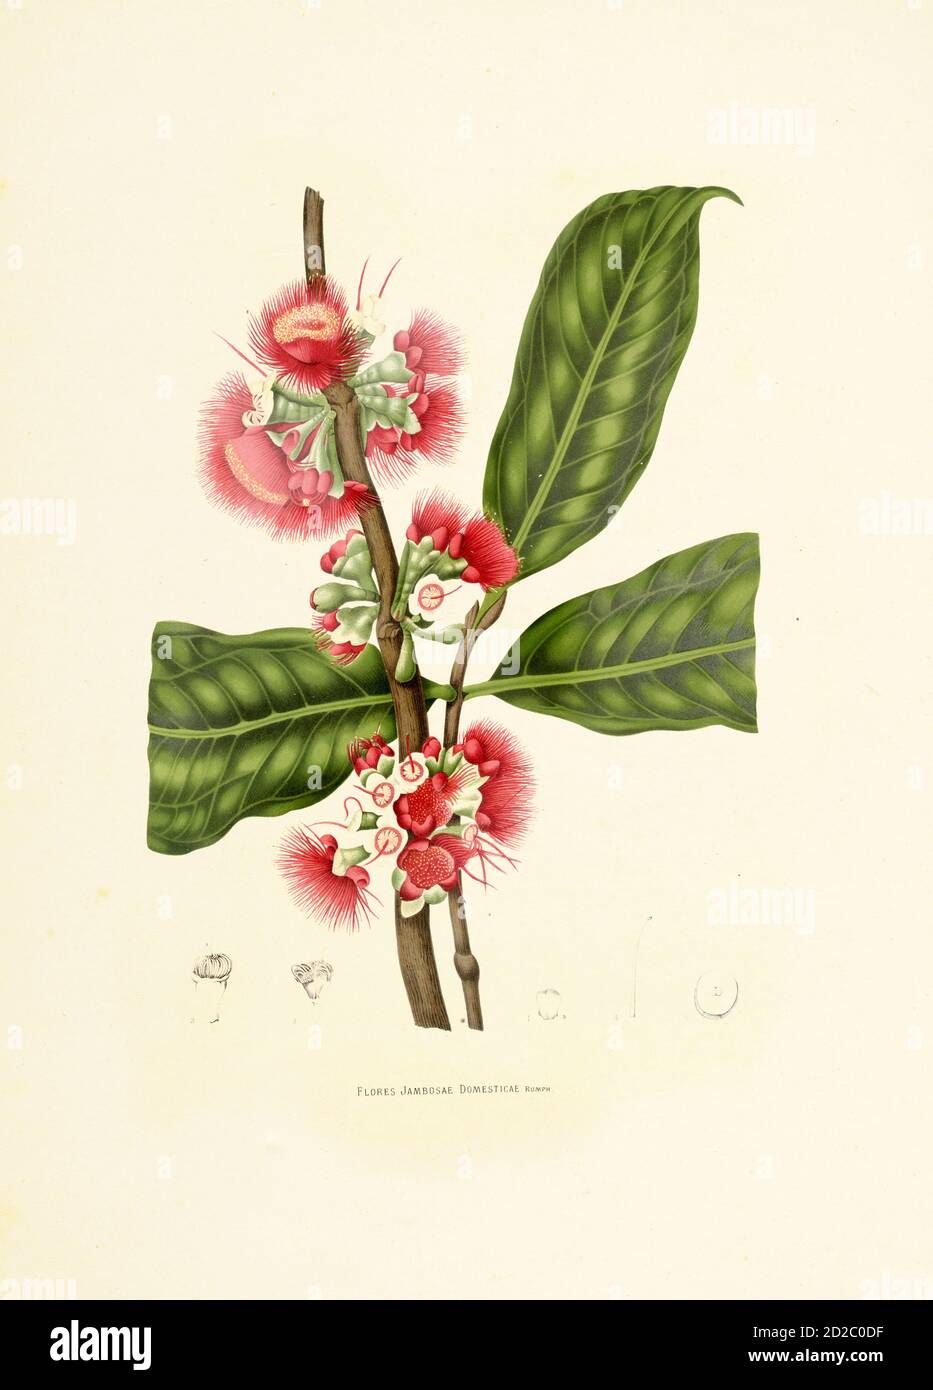 Antique 19th-century illustration of a syzygium malaccense (also known as jambosa domestica, Malay apple, Malay rose apple, otaheite cashew and pommer Stock Photo